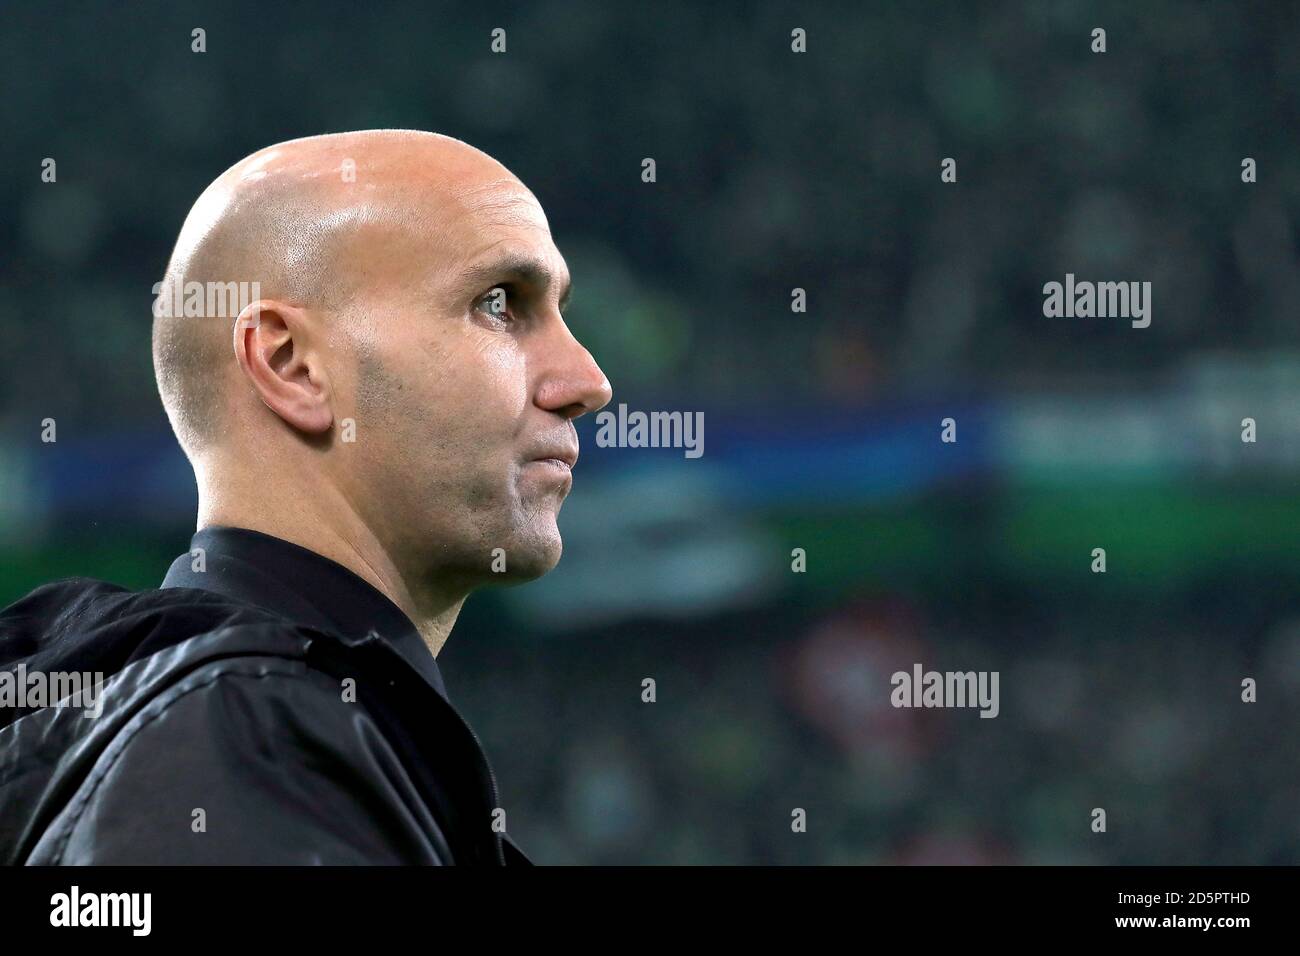 Borussia Monchengladbach S Manager Andre Schubert During The Champions League Match Stock Photo Alamy